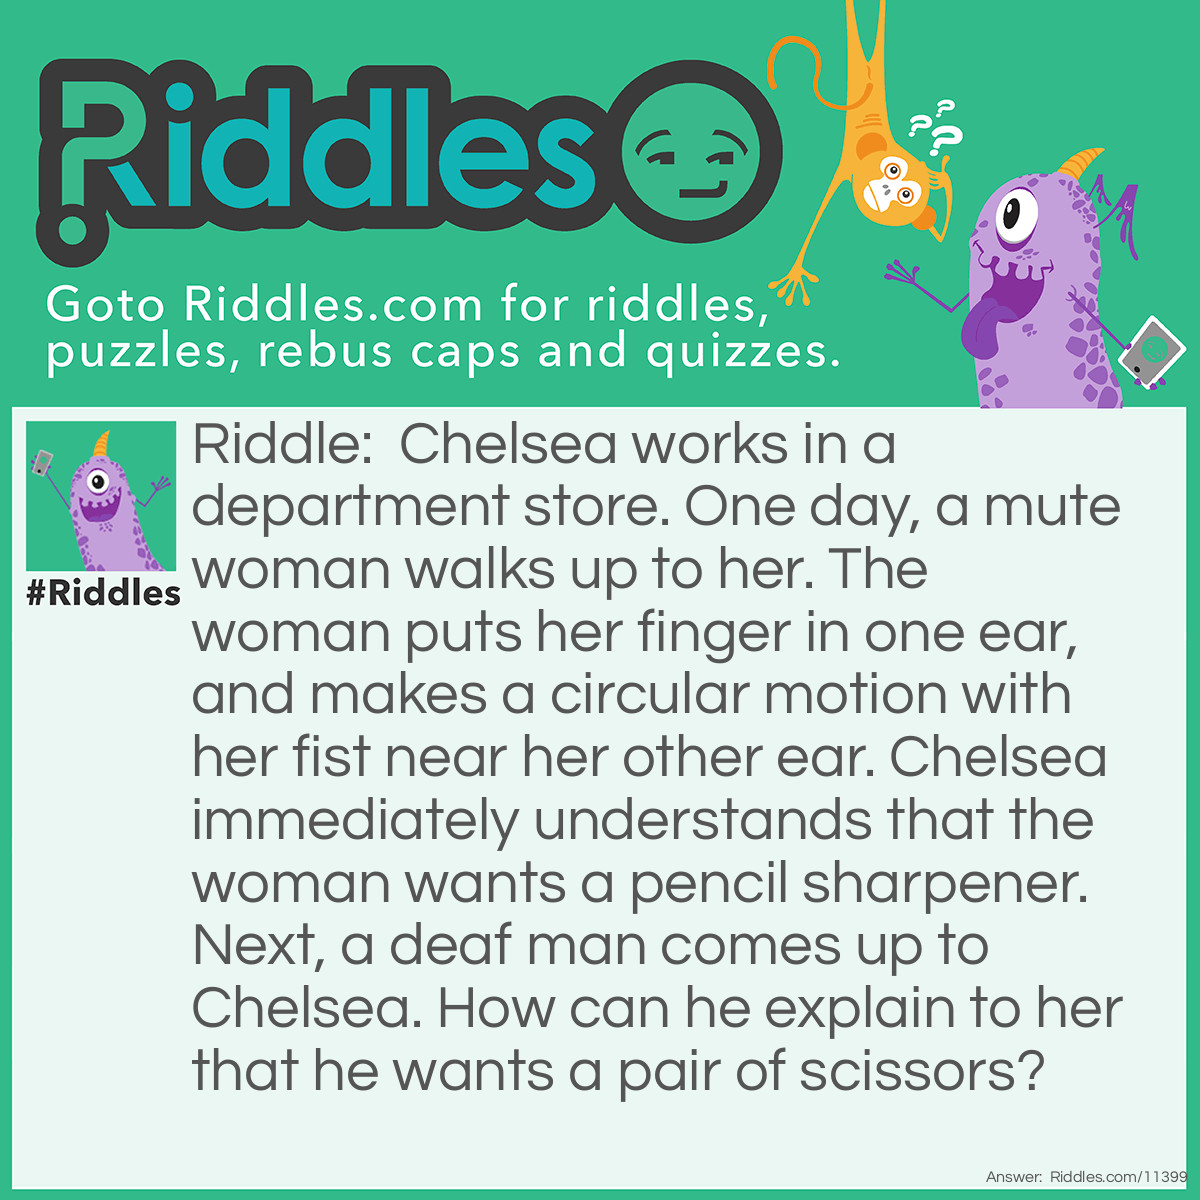 Riddle: Chelsea works in a department store. One day, a mute woman walks up to her. The woman puts her finger in one ear, and makes a circular motion with her fist near her other ear. Chelsea immediately understands that the woman wants a pencil sharpener. Next, a deaf man comes up to Chelsea. How can he explain to her that he wants a pair of scissors? Answer: The man can just say it. He's DEAF, not mute; the guy can't hear, but it doesn't mean that he can't SPEAK.